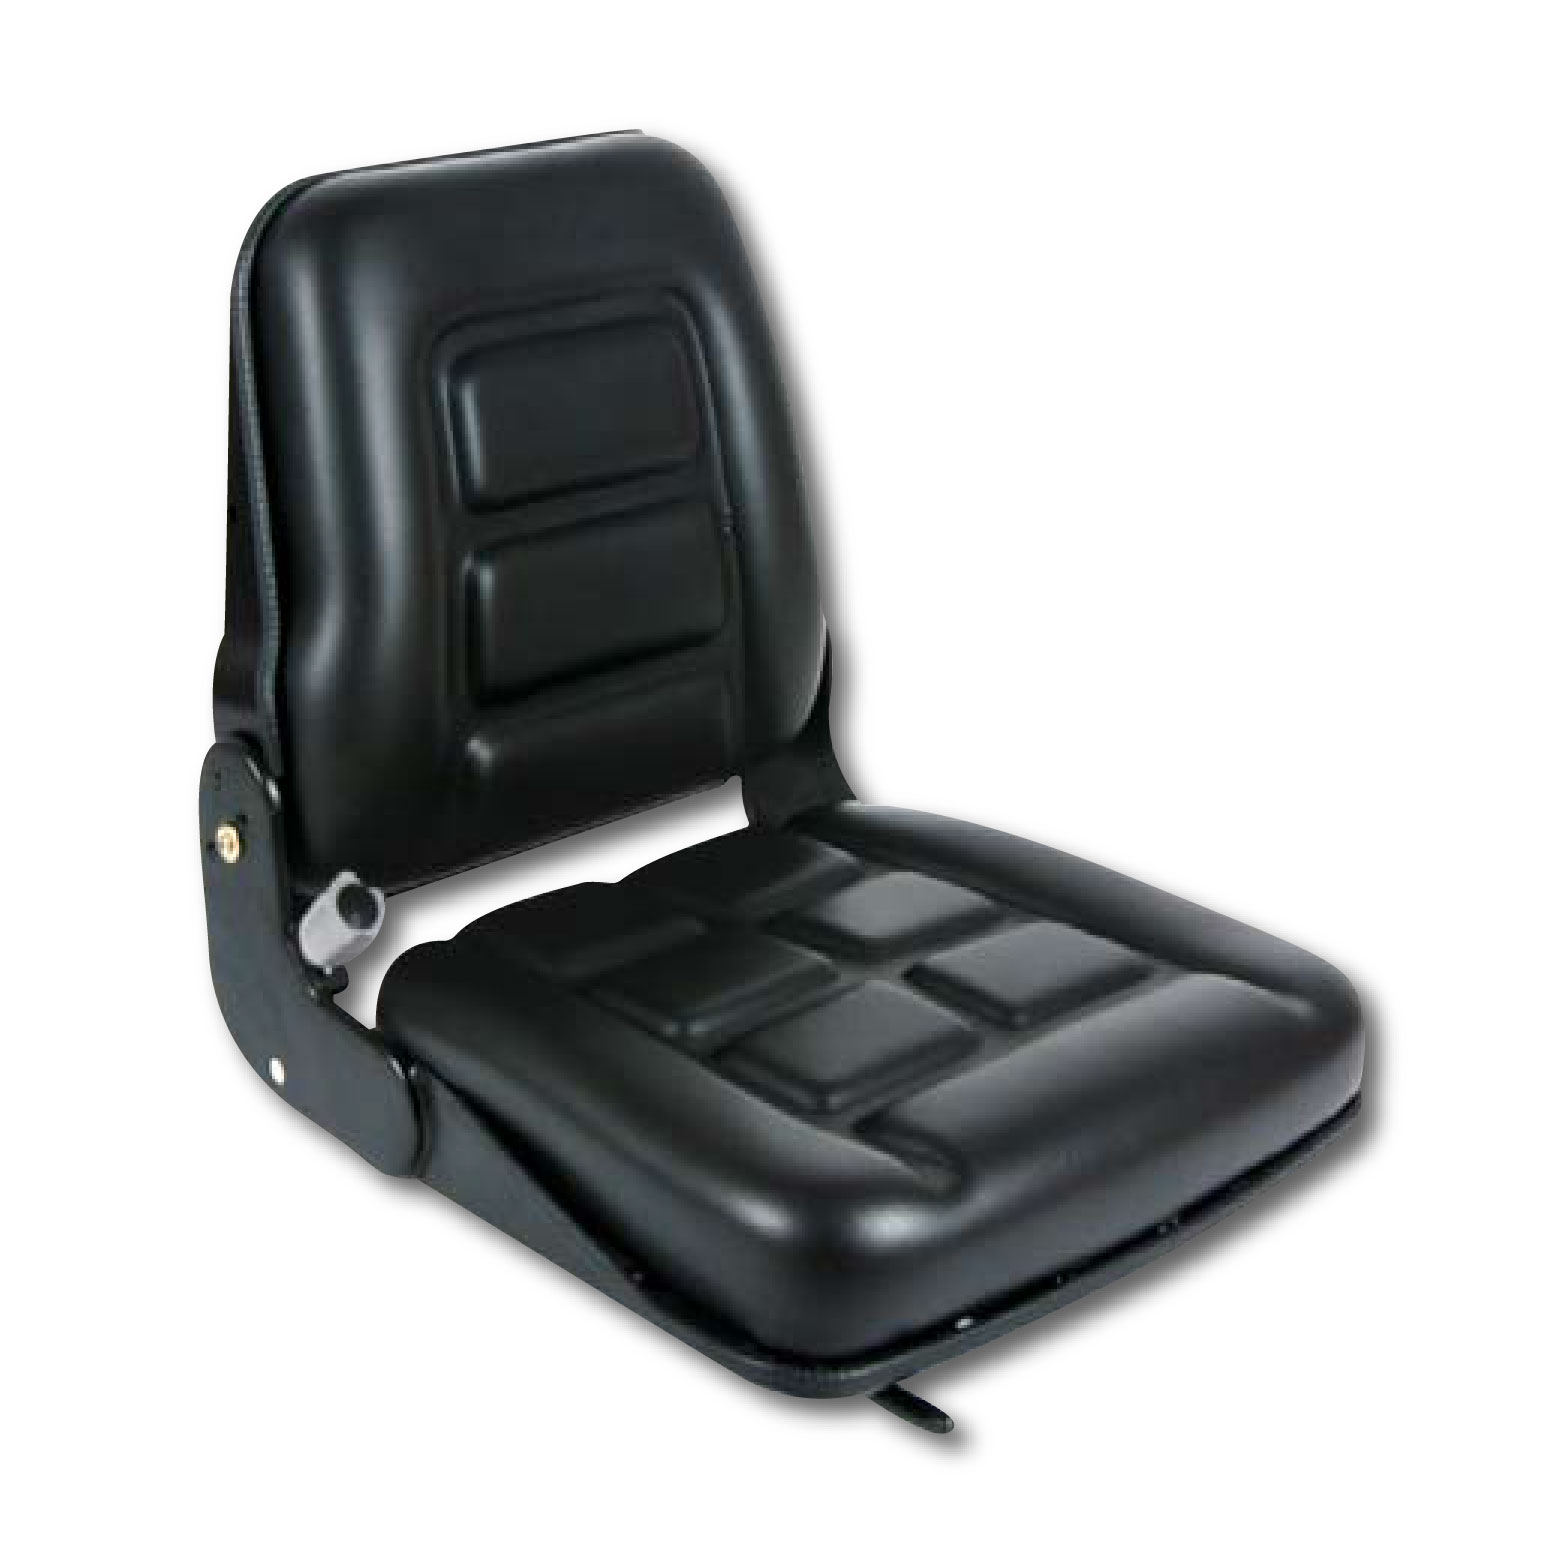 Construction Machinery Seat Forklift Seat Forklift Accessories Engineering Seat